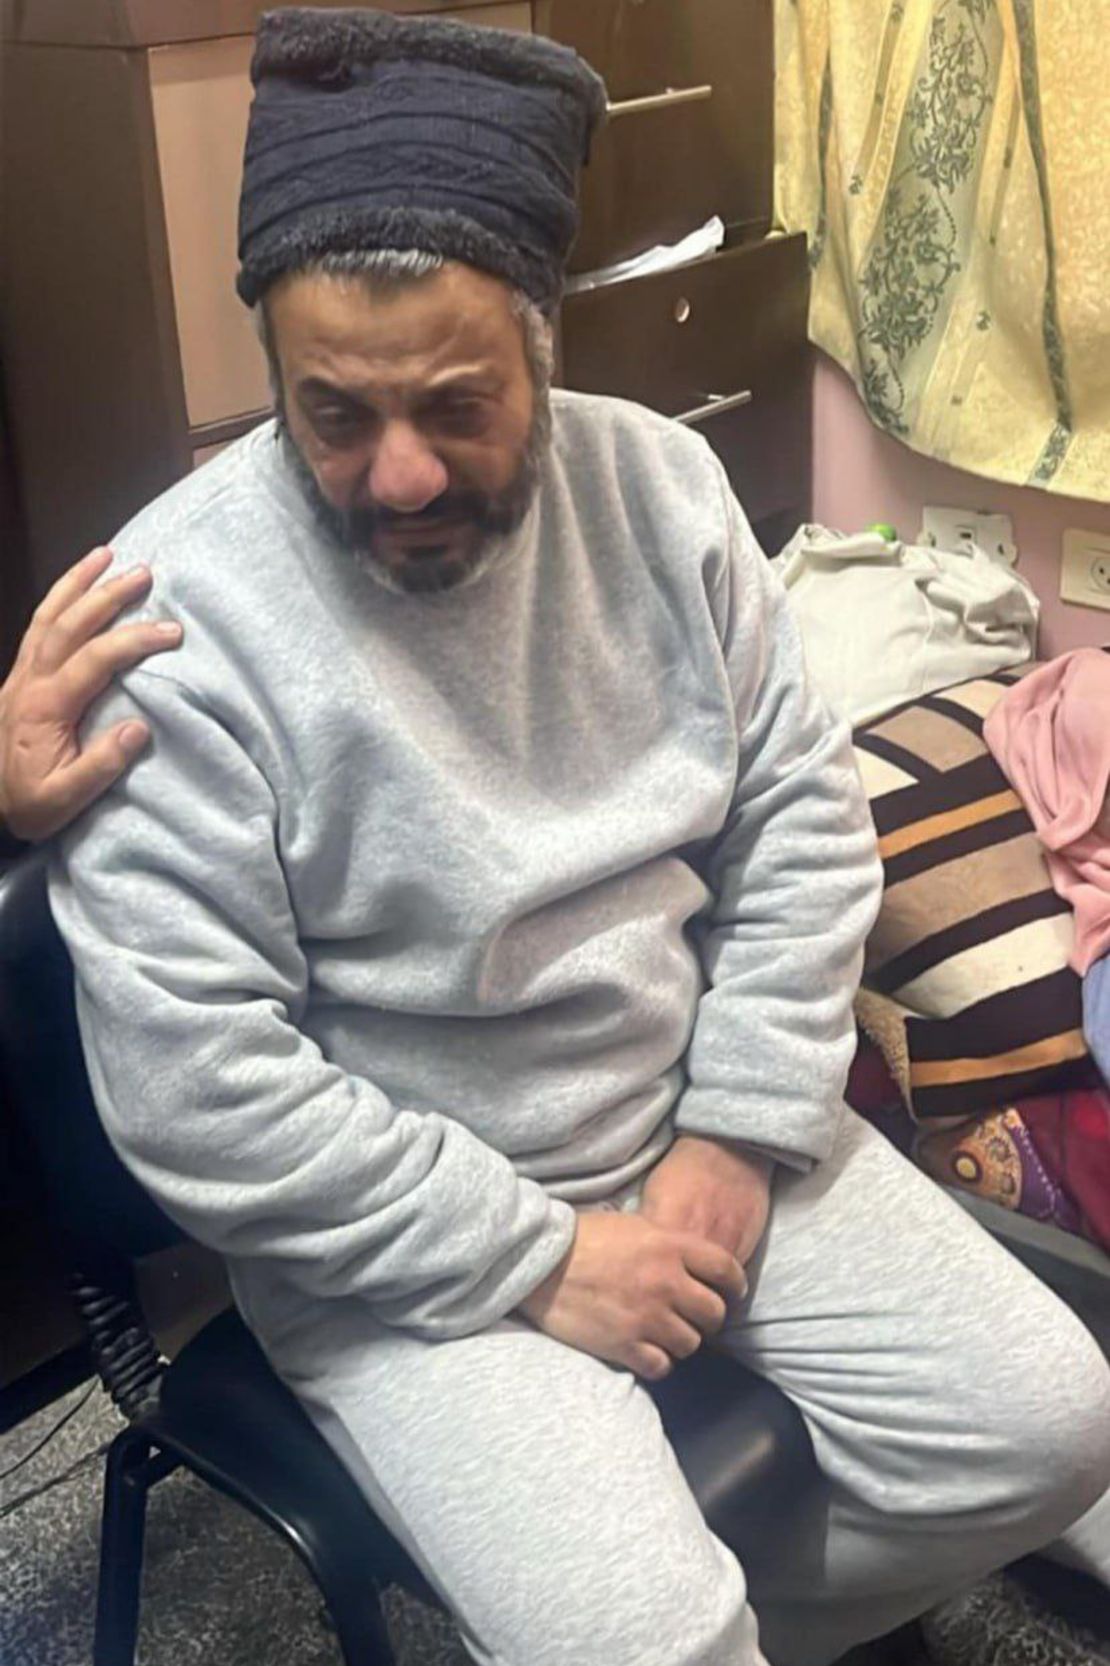 Al-Ran is pictured on the day of his release from a detention camp, in a visibly worse physical condition.